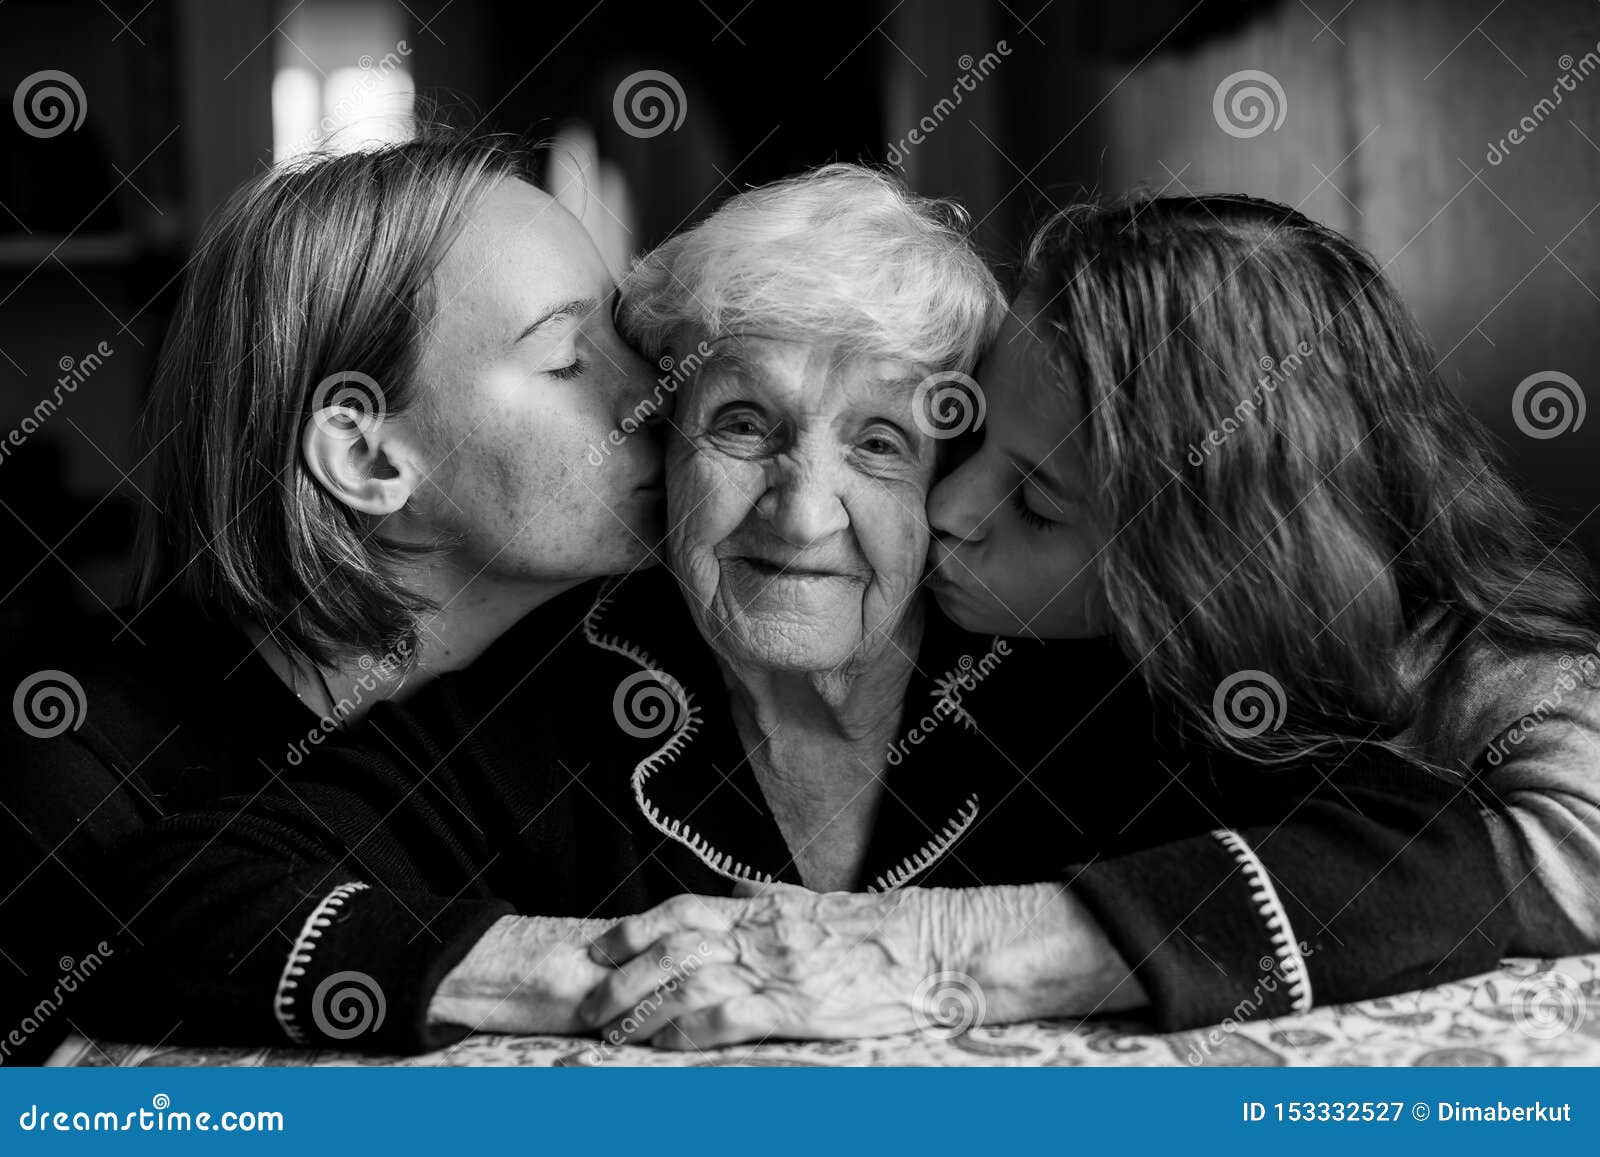 lesbian old young kissing hot photo